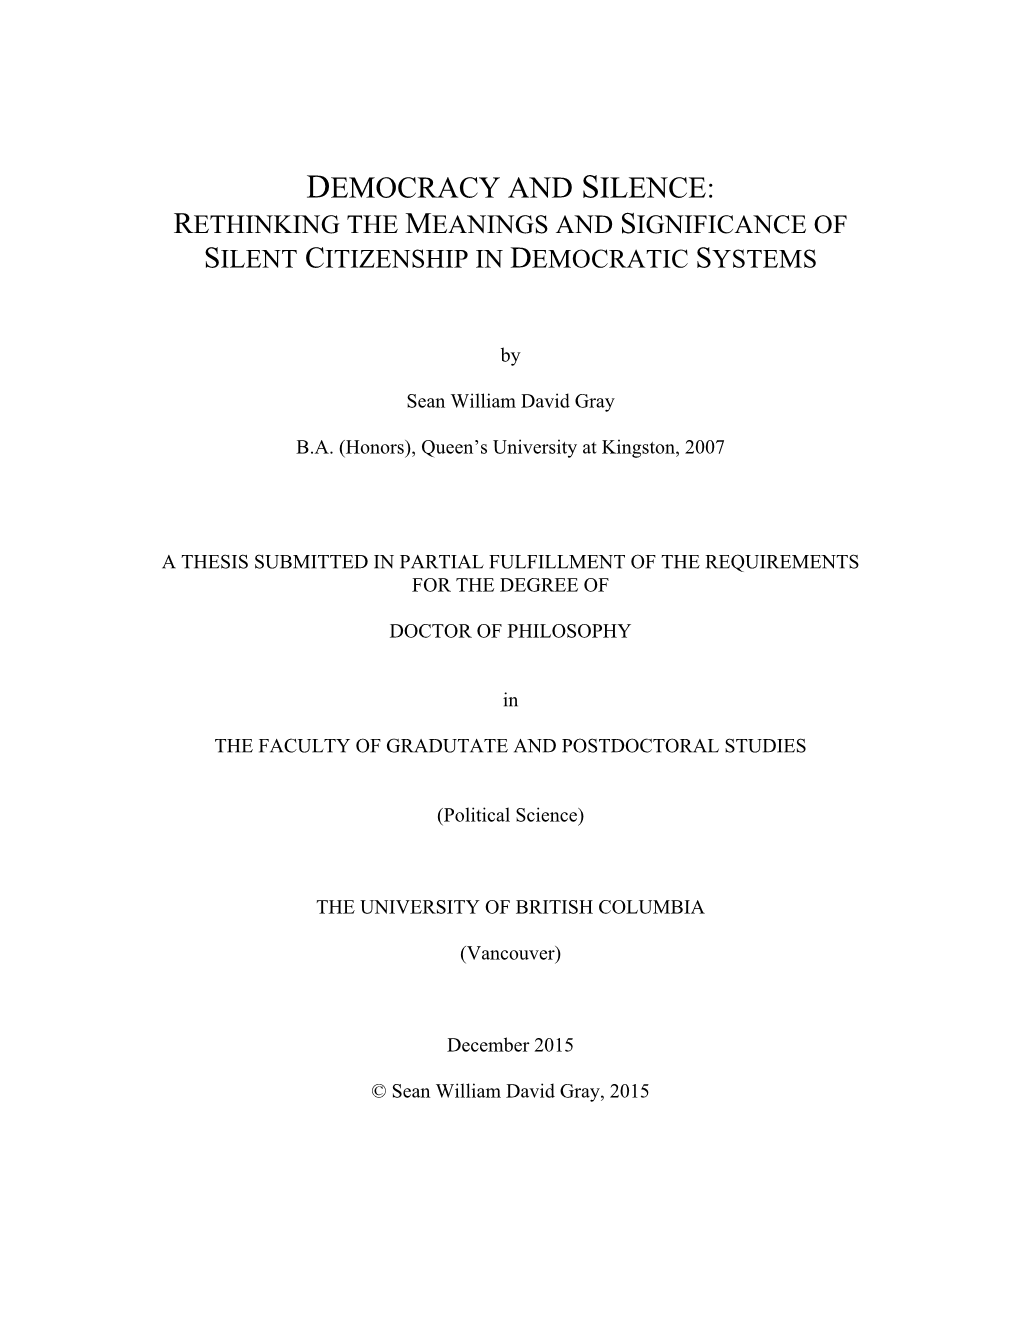 Democracy and Silence: Rethinking the Meanings and Significance of Silent Citizenship in Democratic Systems